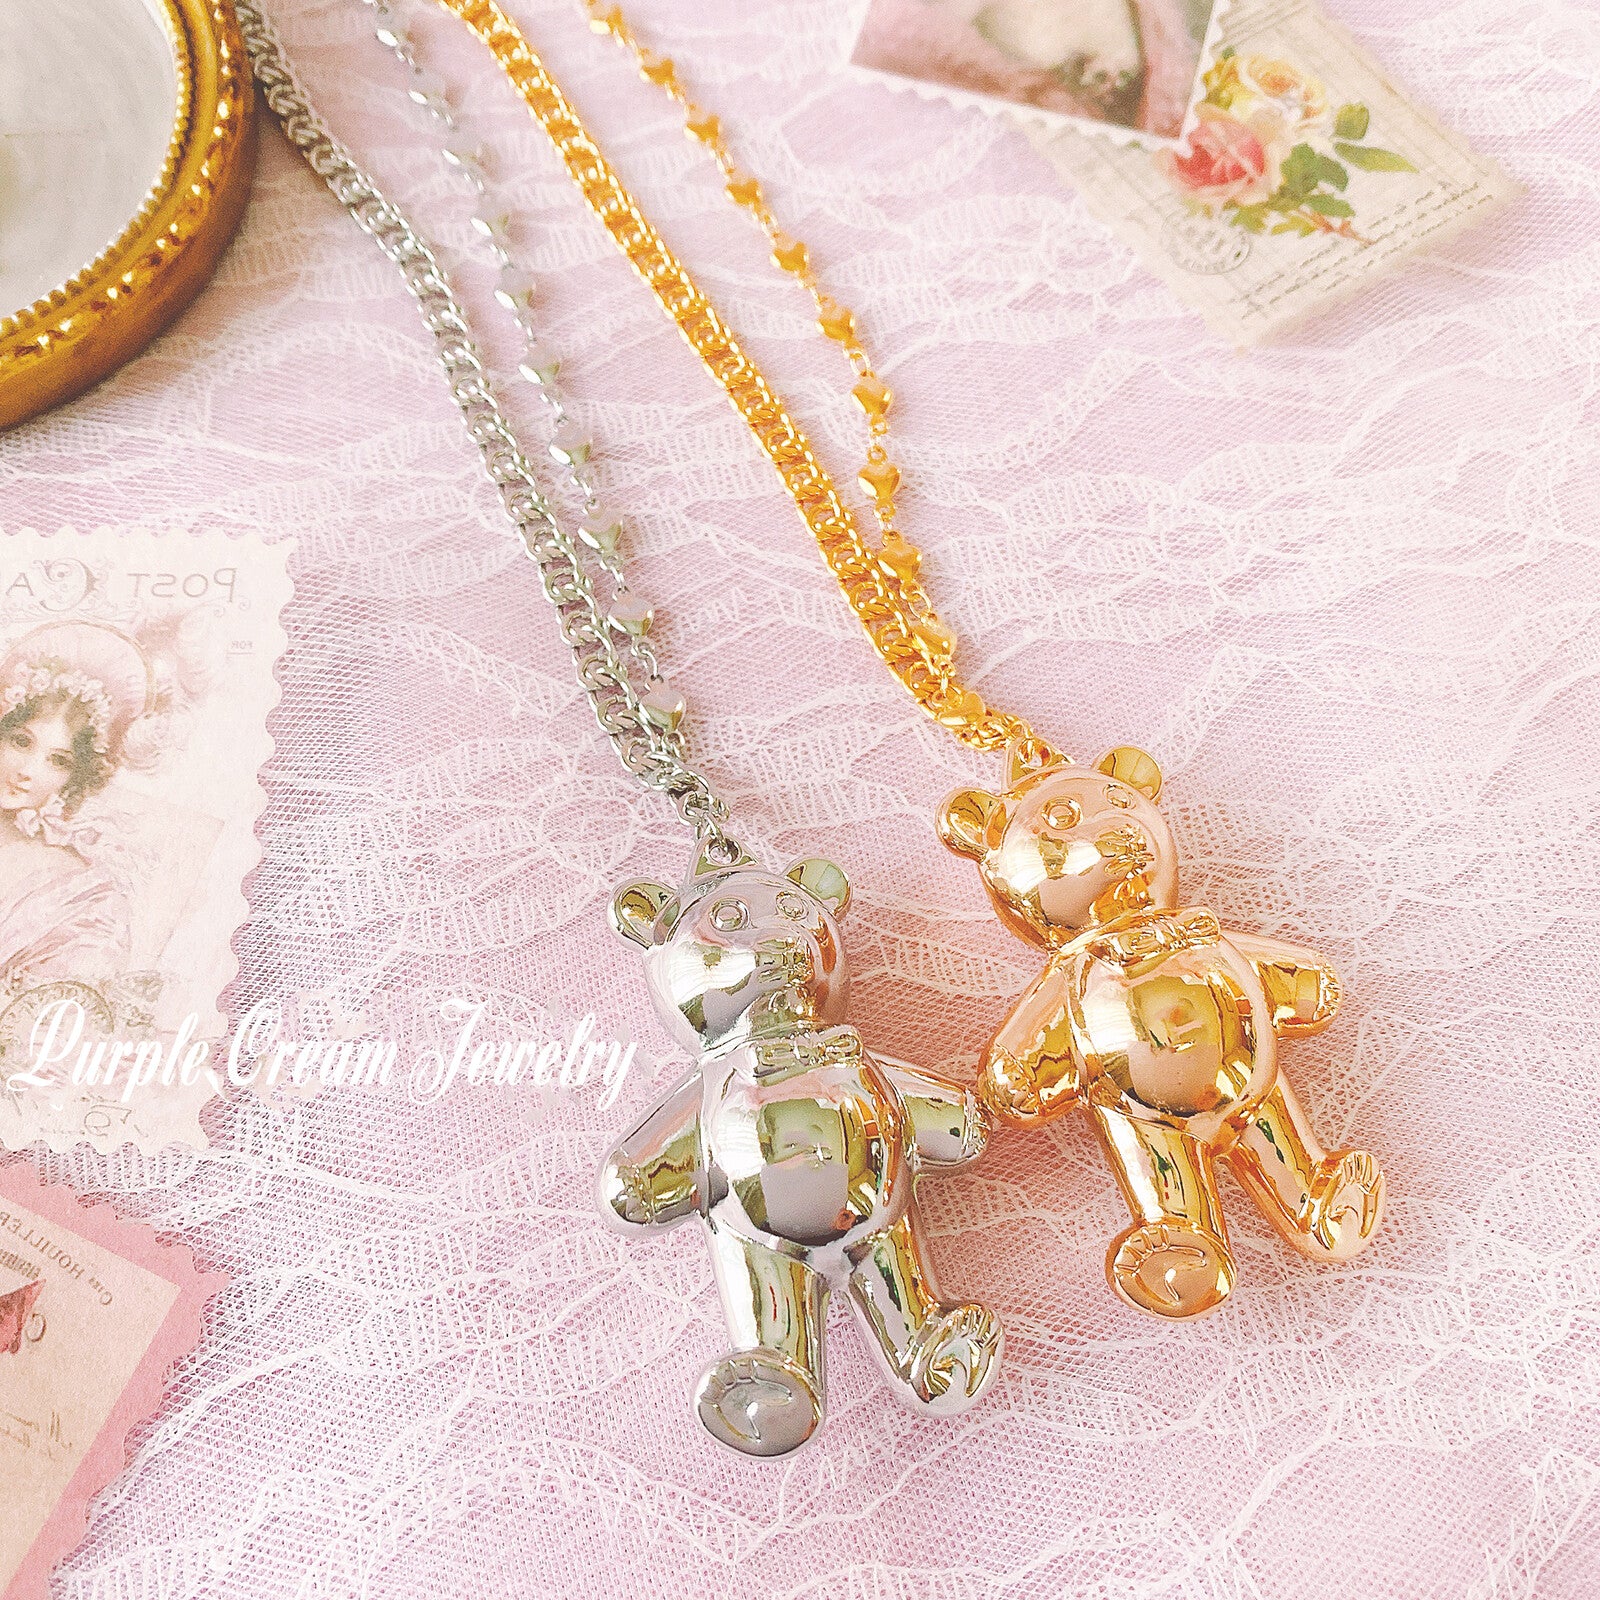 Purple Cream Big Teddy Bear Asymmetry Chain Necklace - YOUAREMYPOISON